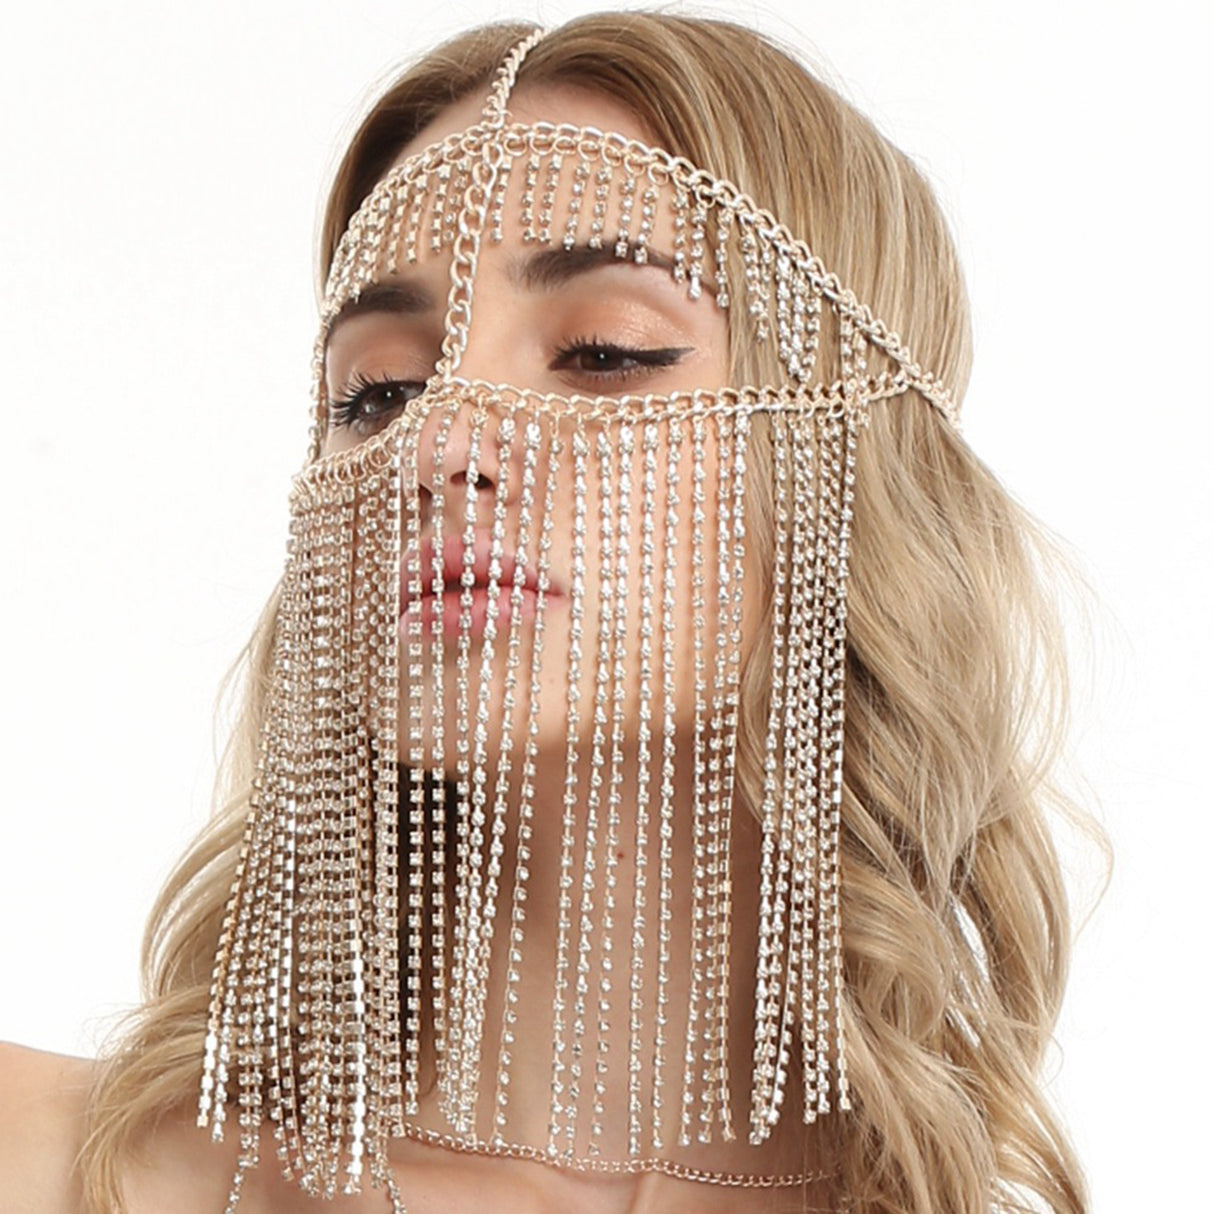 Accessory for a face mask with a burqa with chains studded with crystals